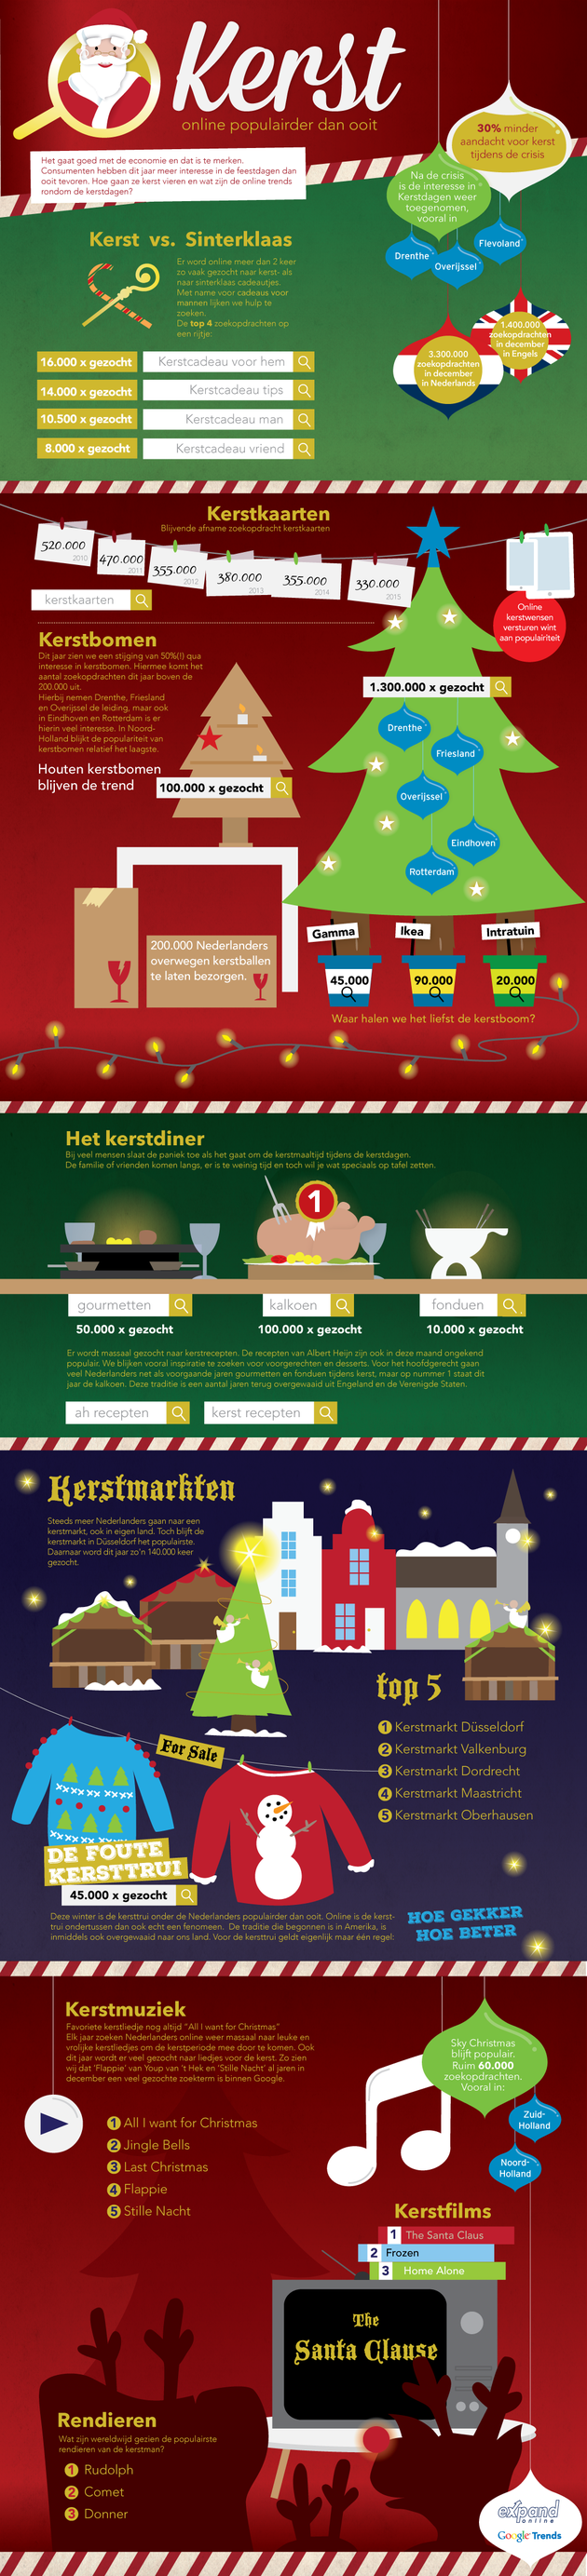 20151222 Kerst infographic